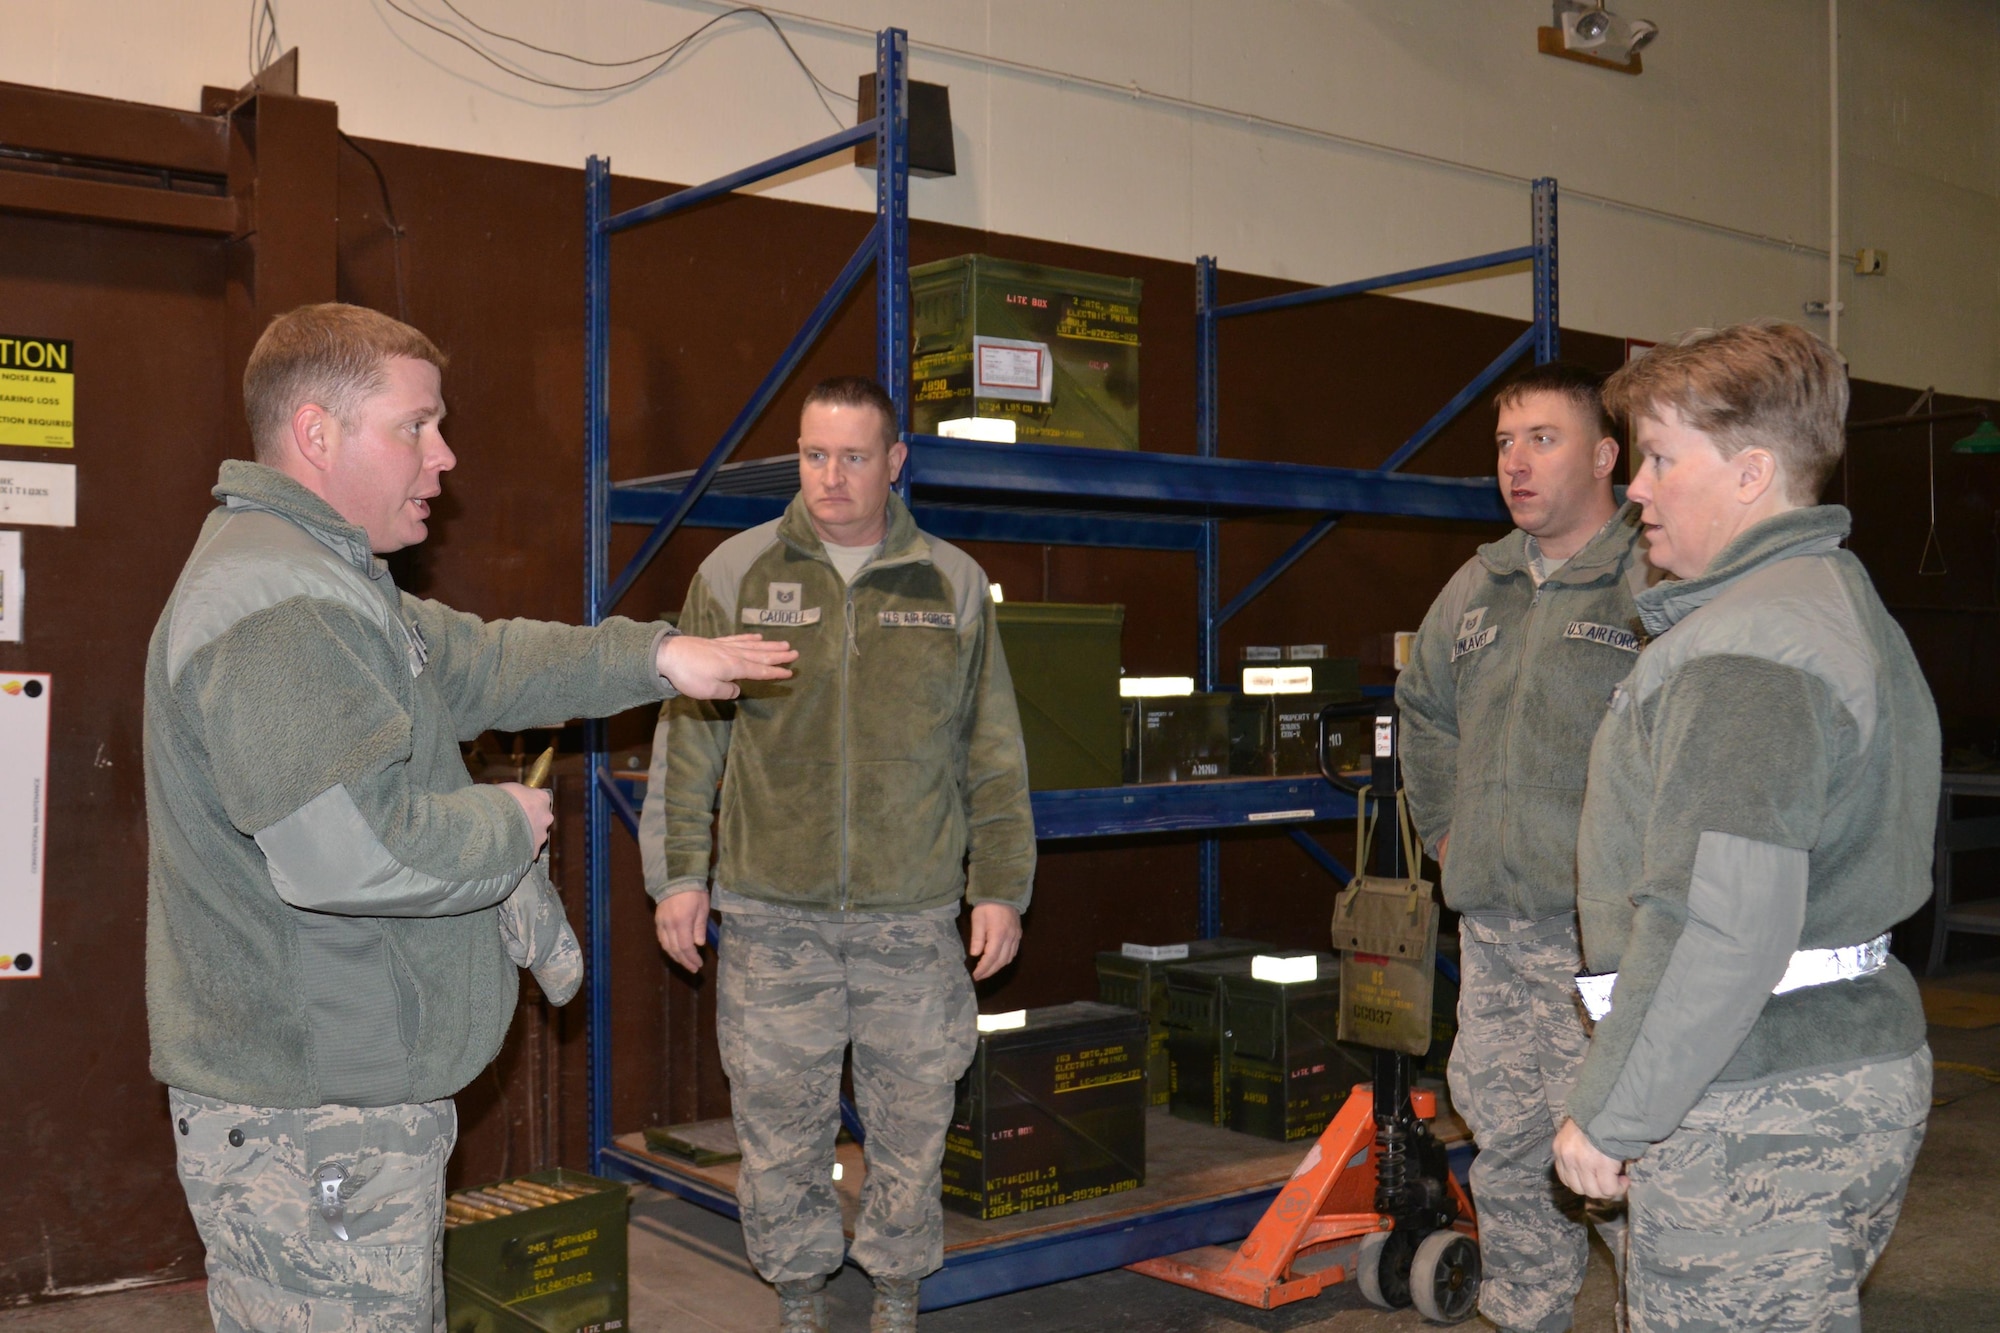 U.S. Air Force munitions specialists Senior Master Sgt. Keith Long, Technical Sgt.  David Caudell and Staff Sgt. Joe Dunlavey from the 477th Fighter Group showcase equipment and capabilities from the 3rd Munitions Flight November 6, 2016. Munitions Systems specialists are Airmen tasked with handling, storing, transporting, arming and disarming non-nuclear weapons systems. The Munitions Systems career field is commonly referred to as "ammo." (Photo by Maj. Carla Gleason, Released)